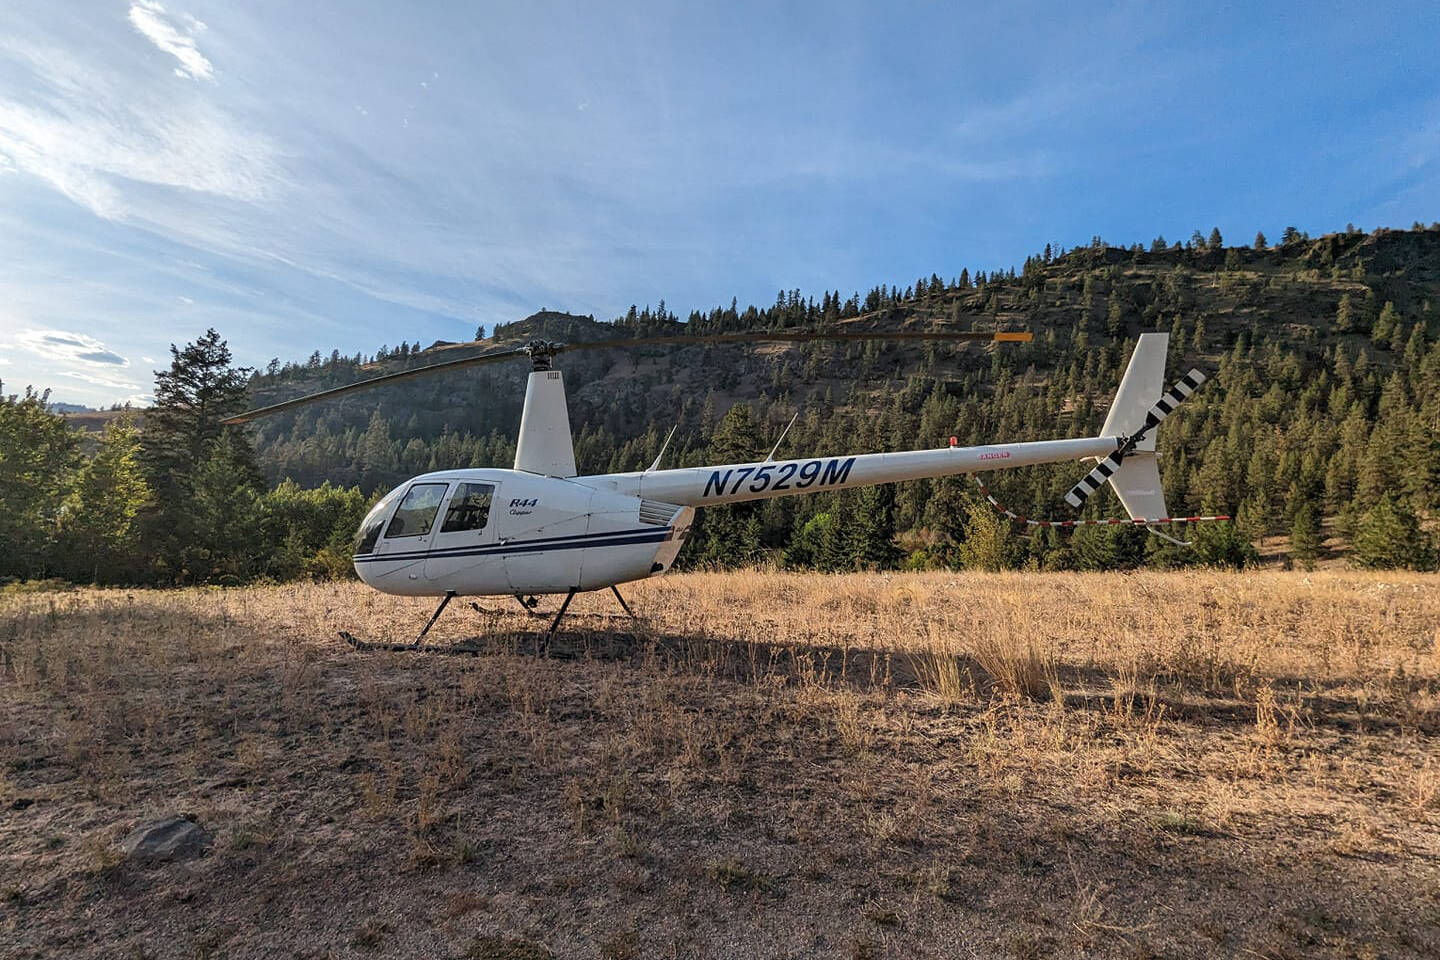 A helicopter believed to be the same one that crashed near Enderby Saturday was spotted landing in Kalamalka Lake Provincial Park earlier in the day. (Jessie Gottlieb Facebook photo)